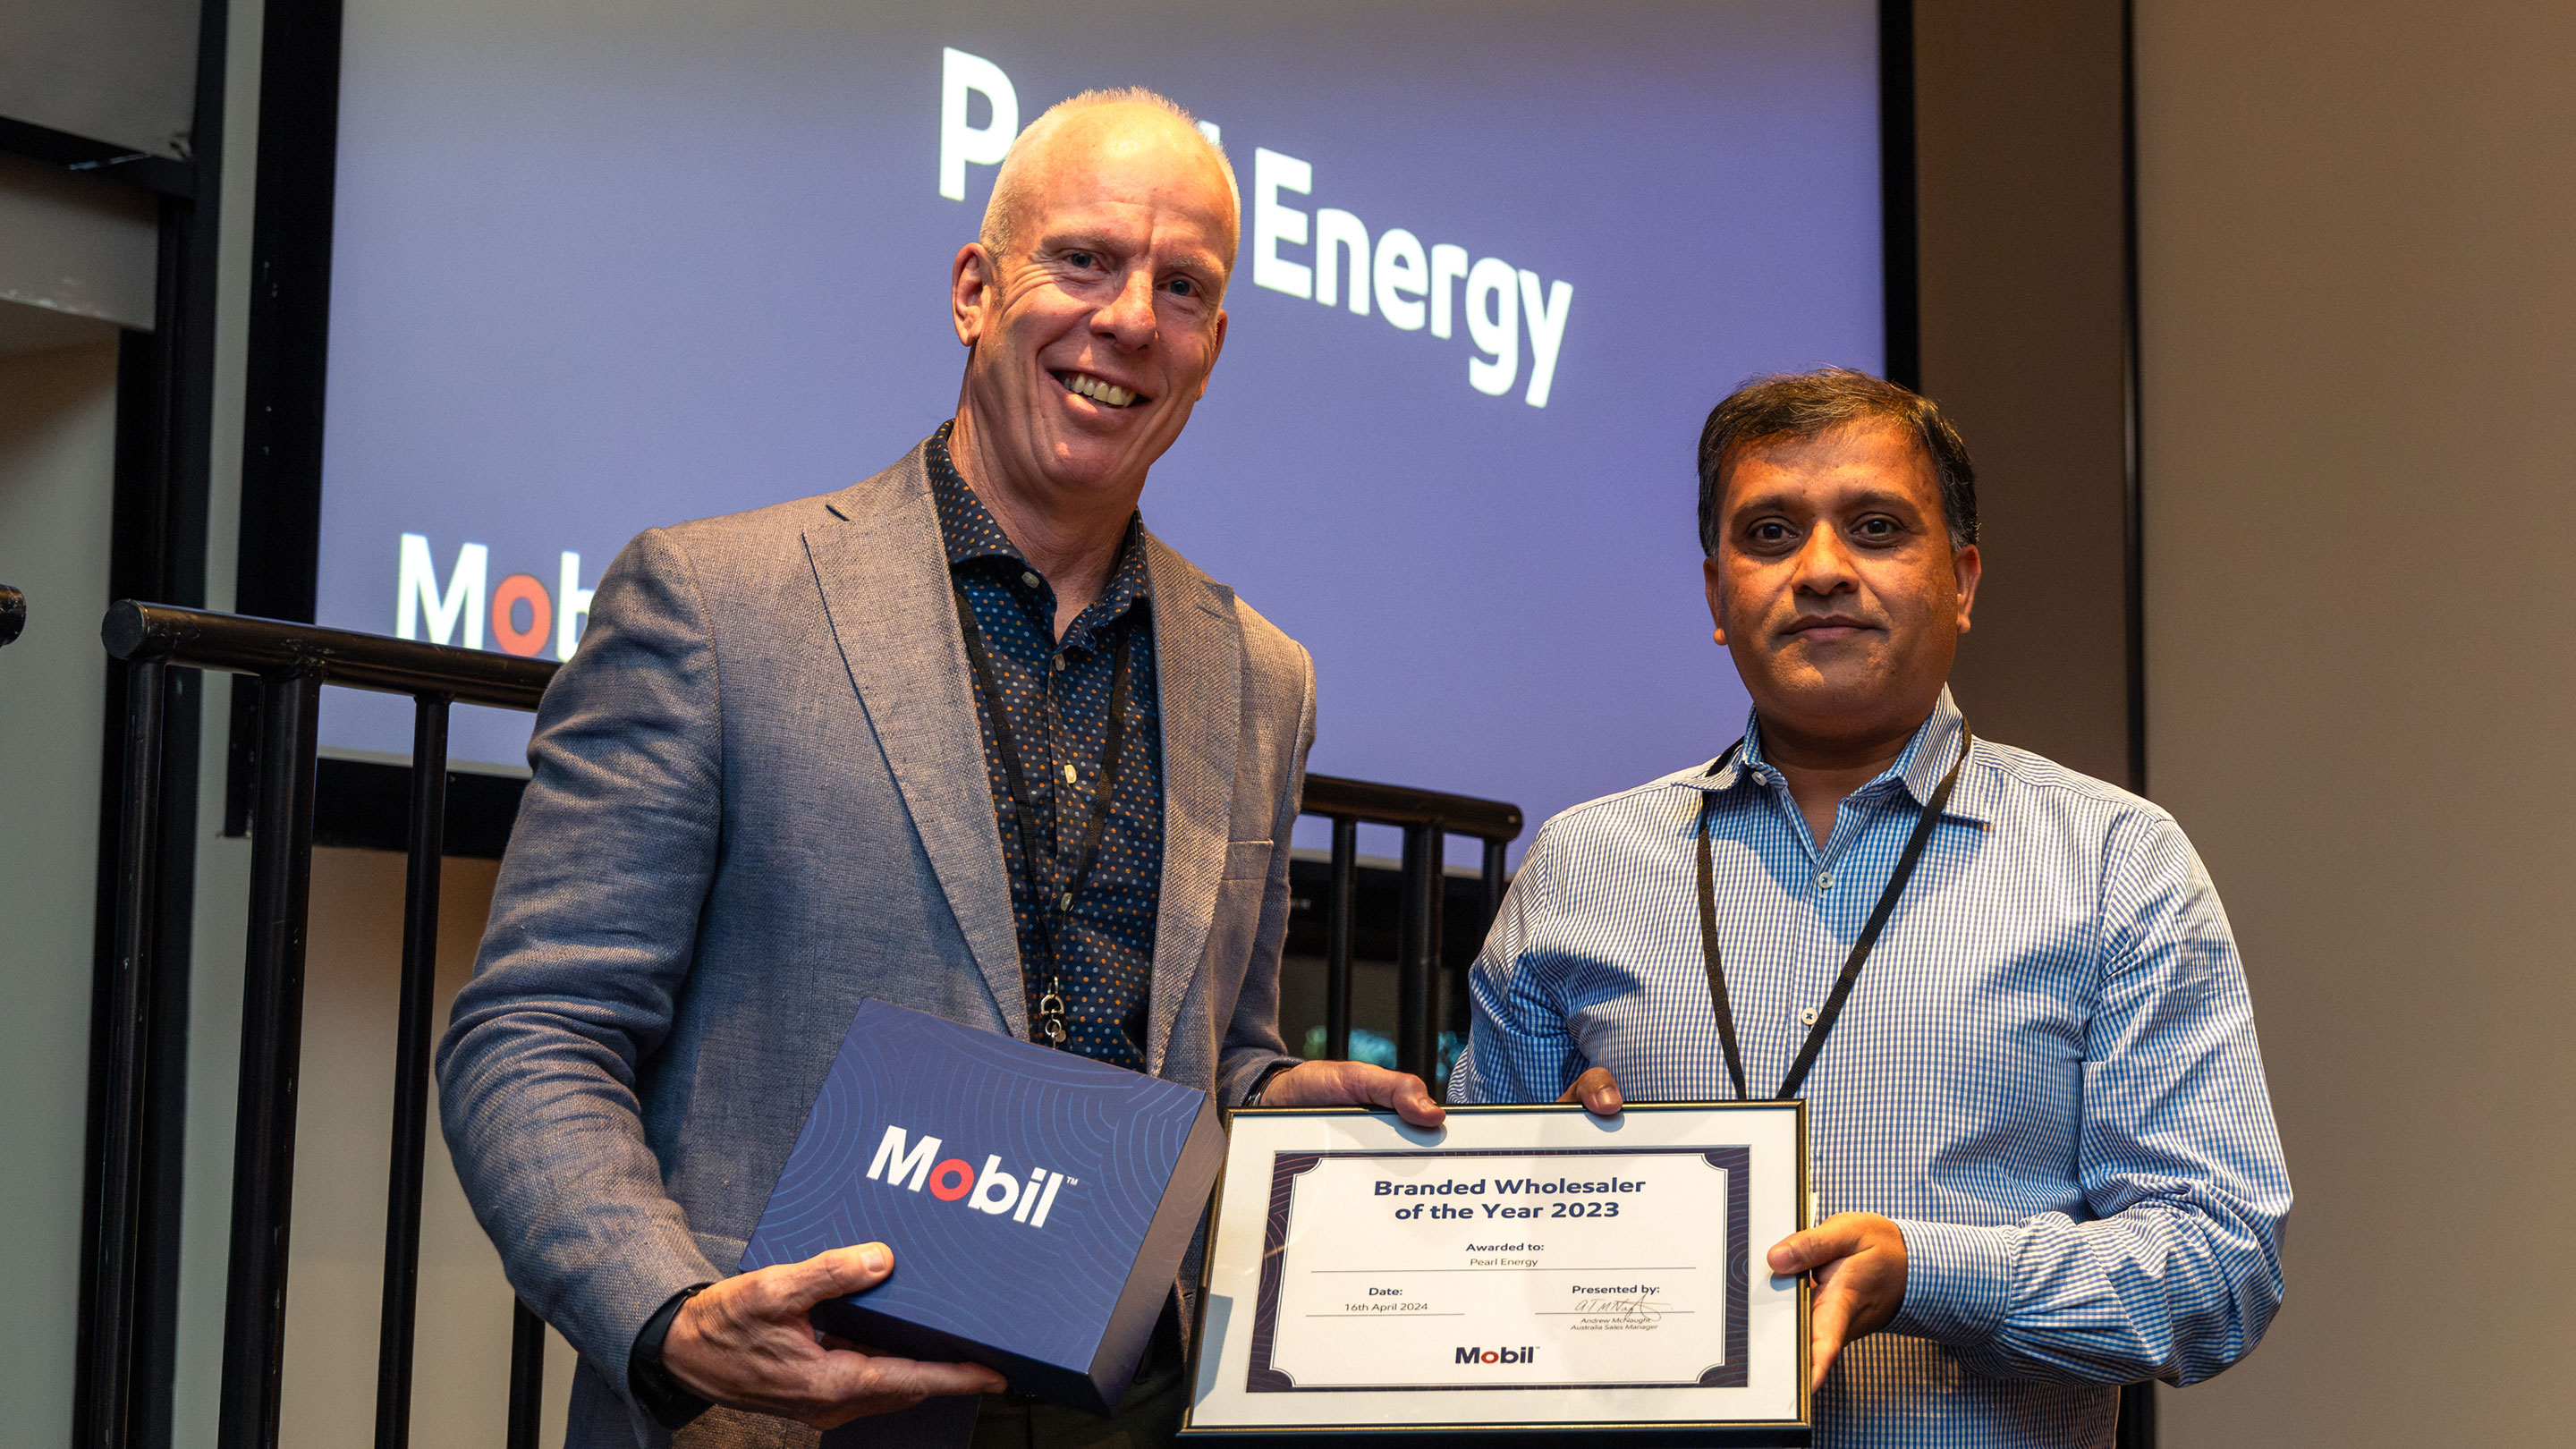 Image Mobil Oil Australia Sales Manager Andrew McNaught presents an award.